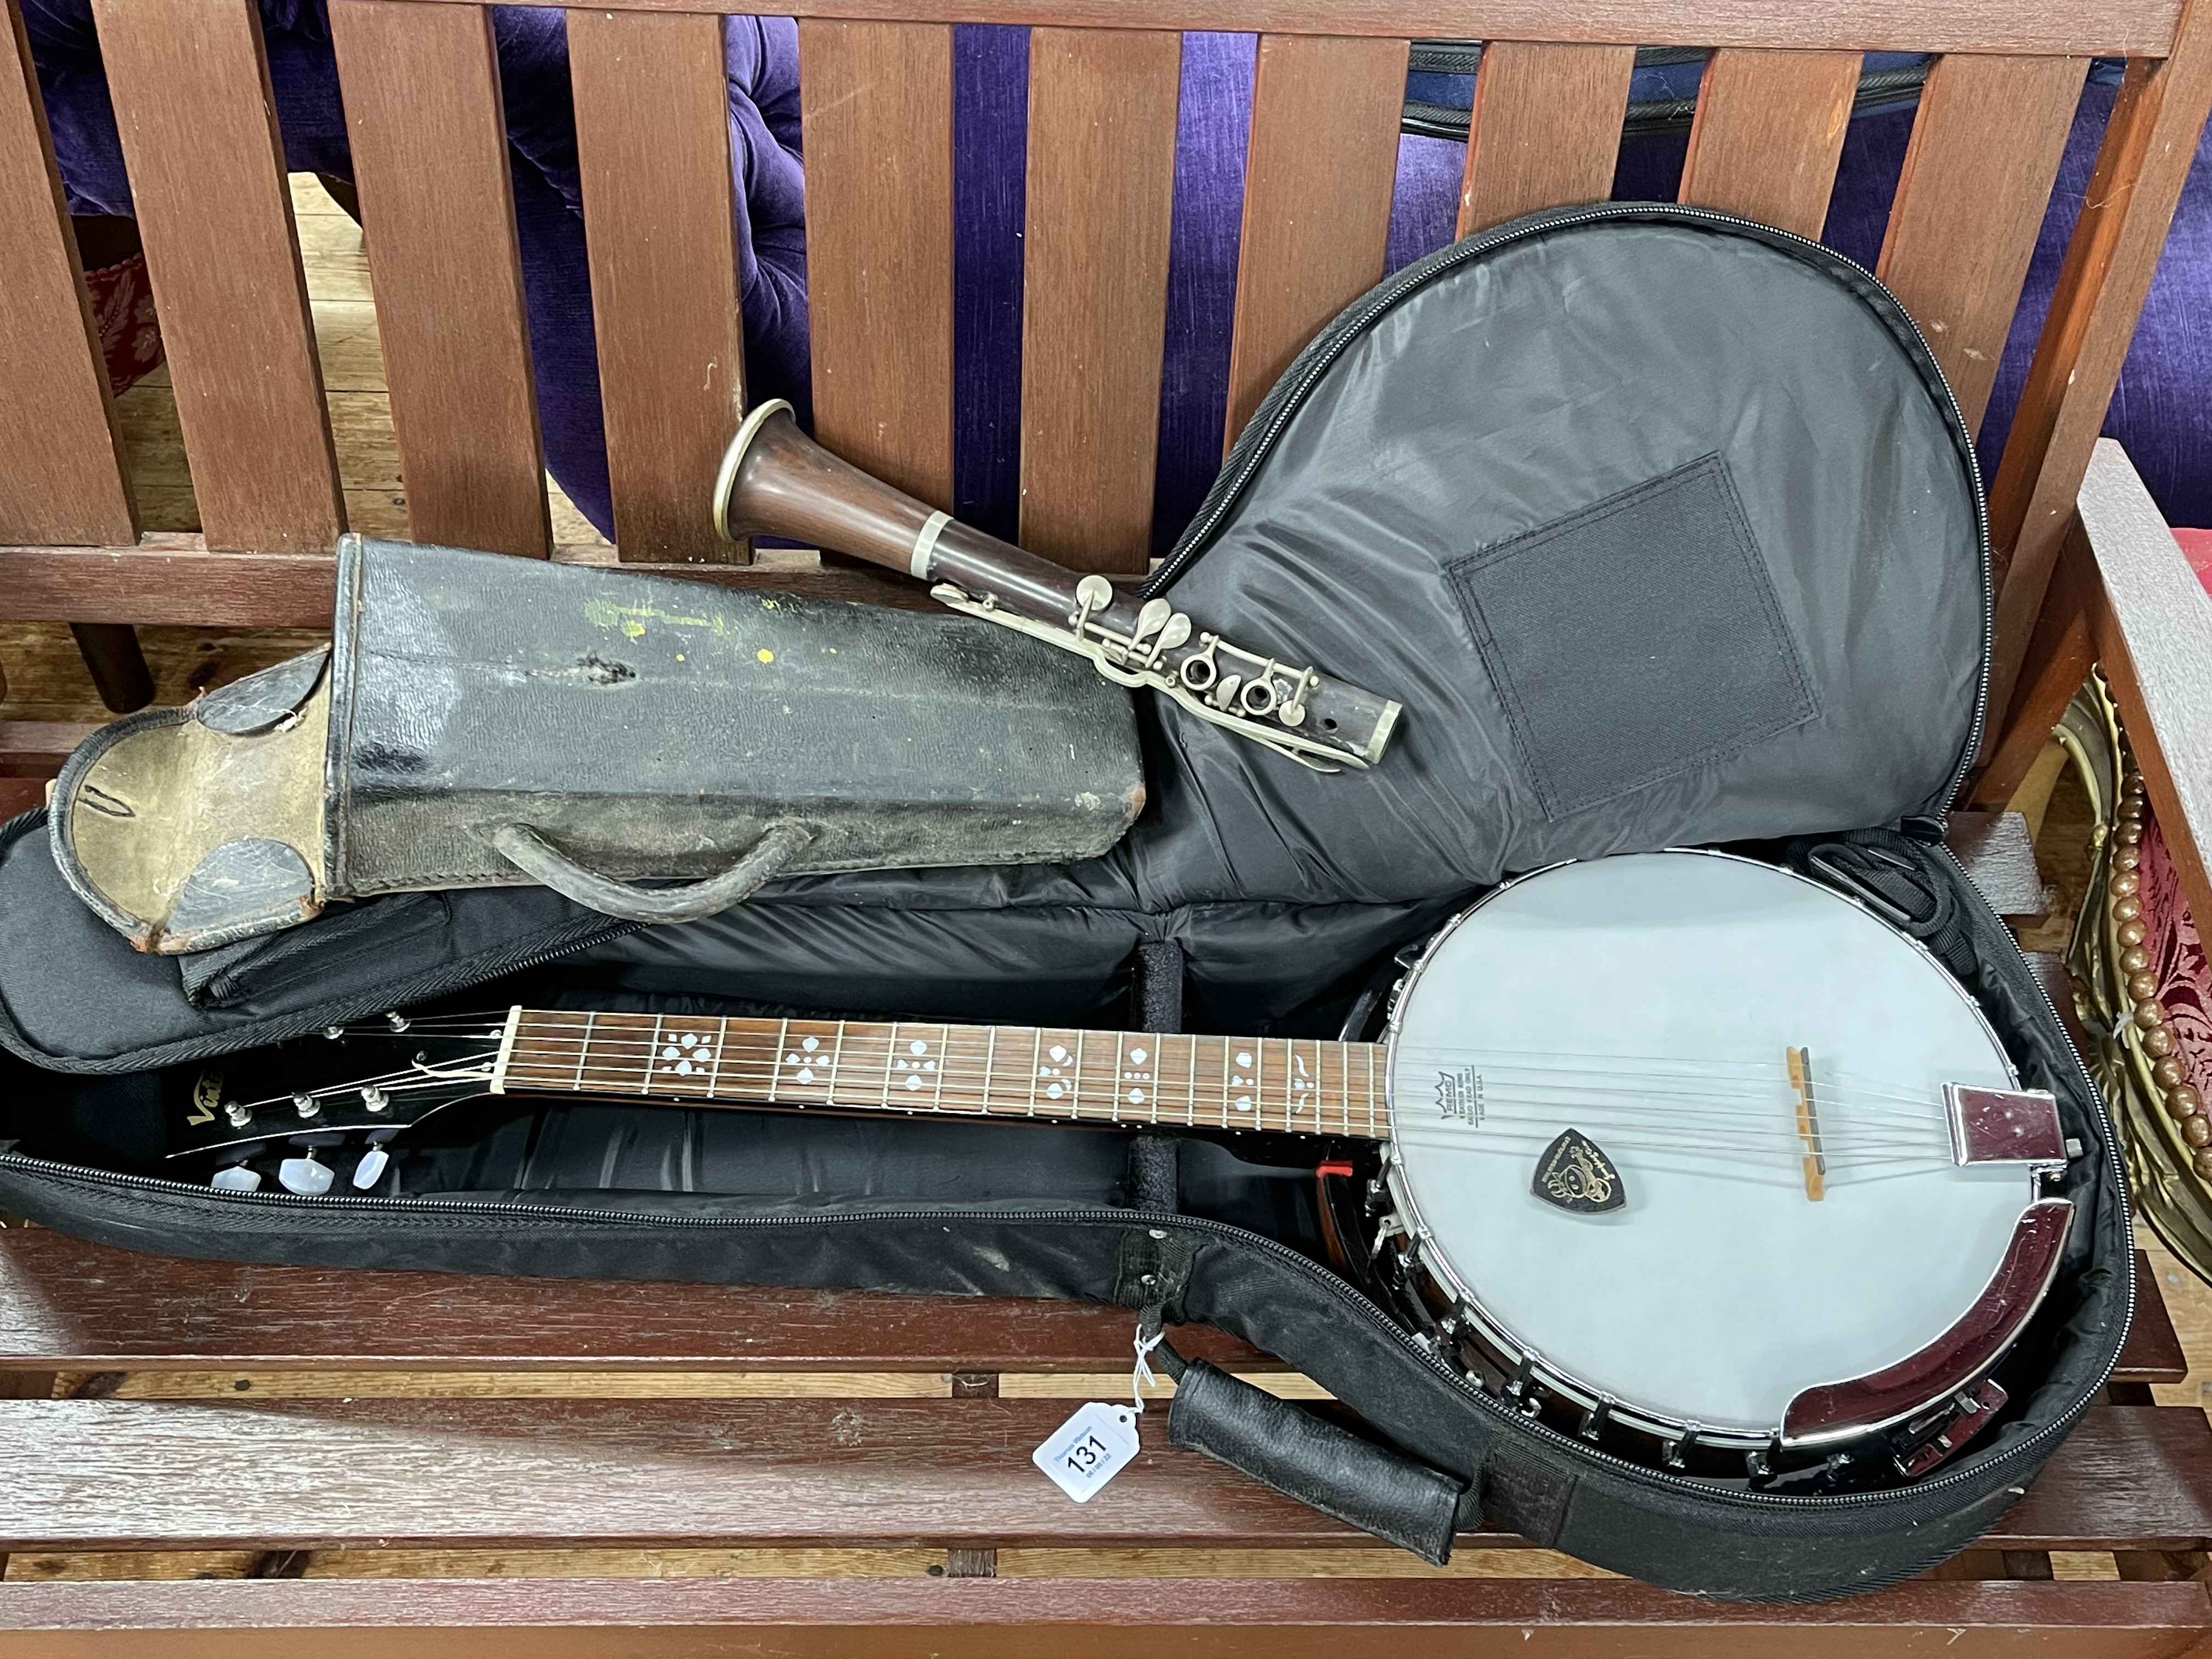 Remo mother of pearl inlaid banjo, clarinet and a Hohner Student II accordion in case.